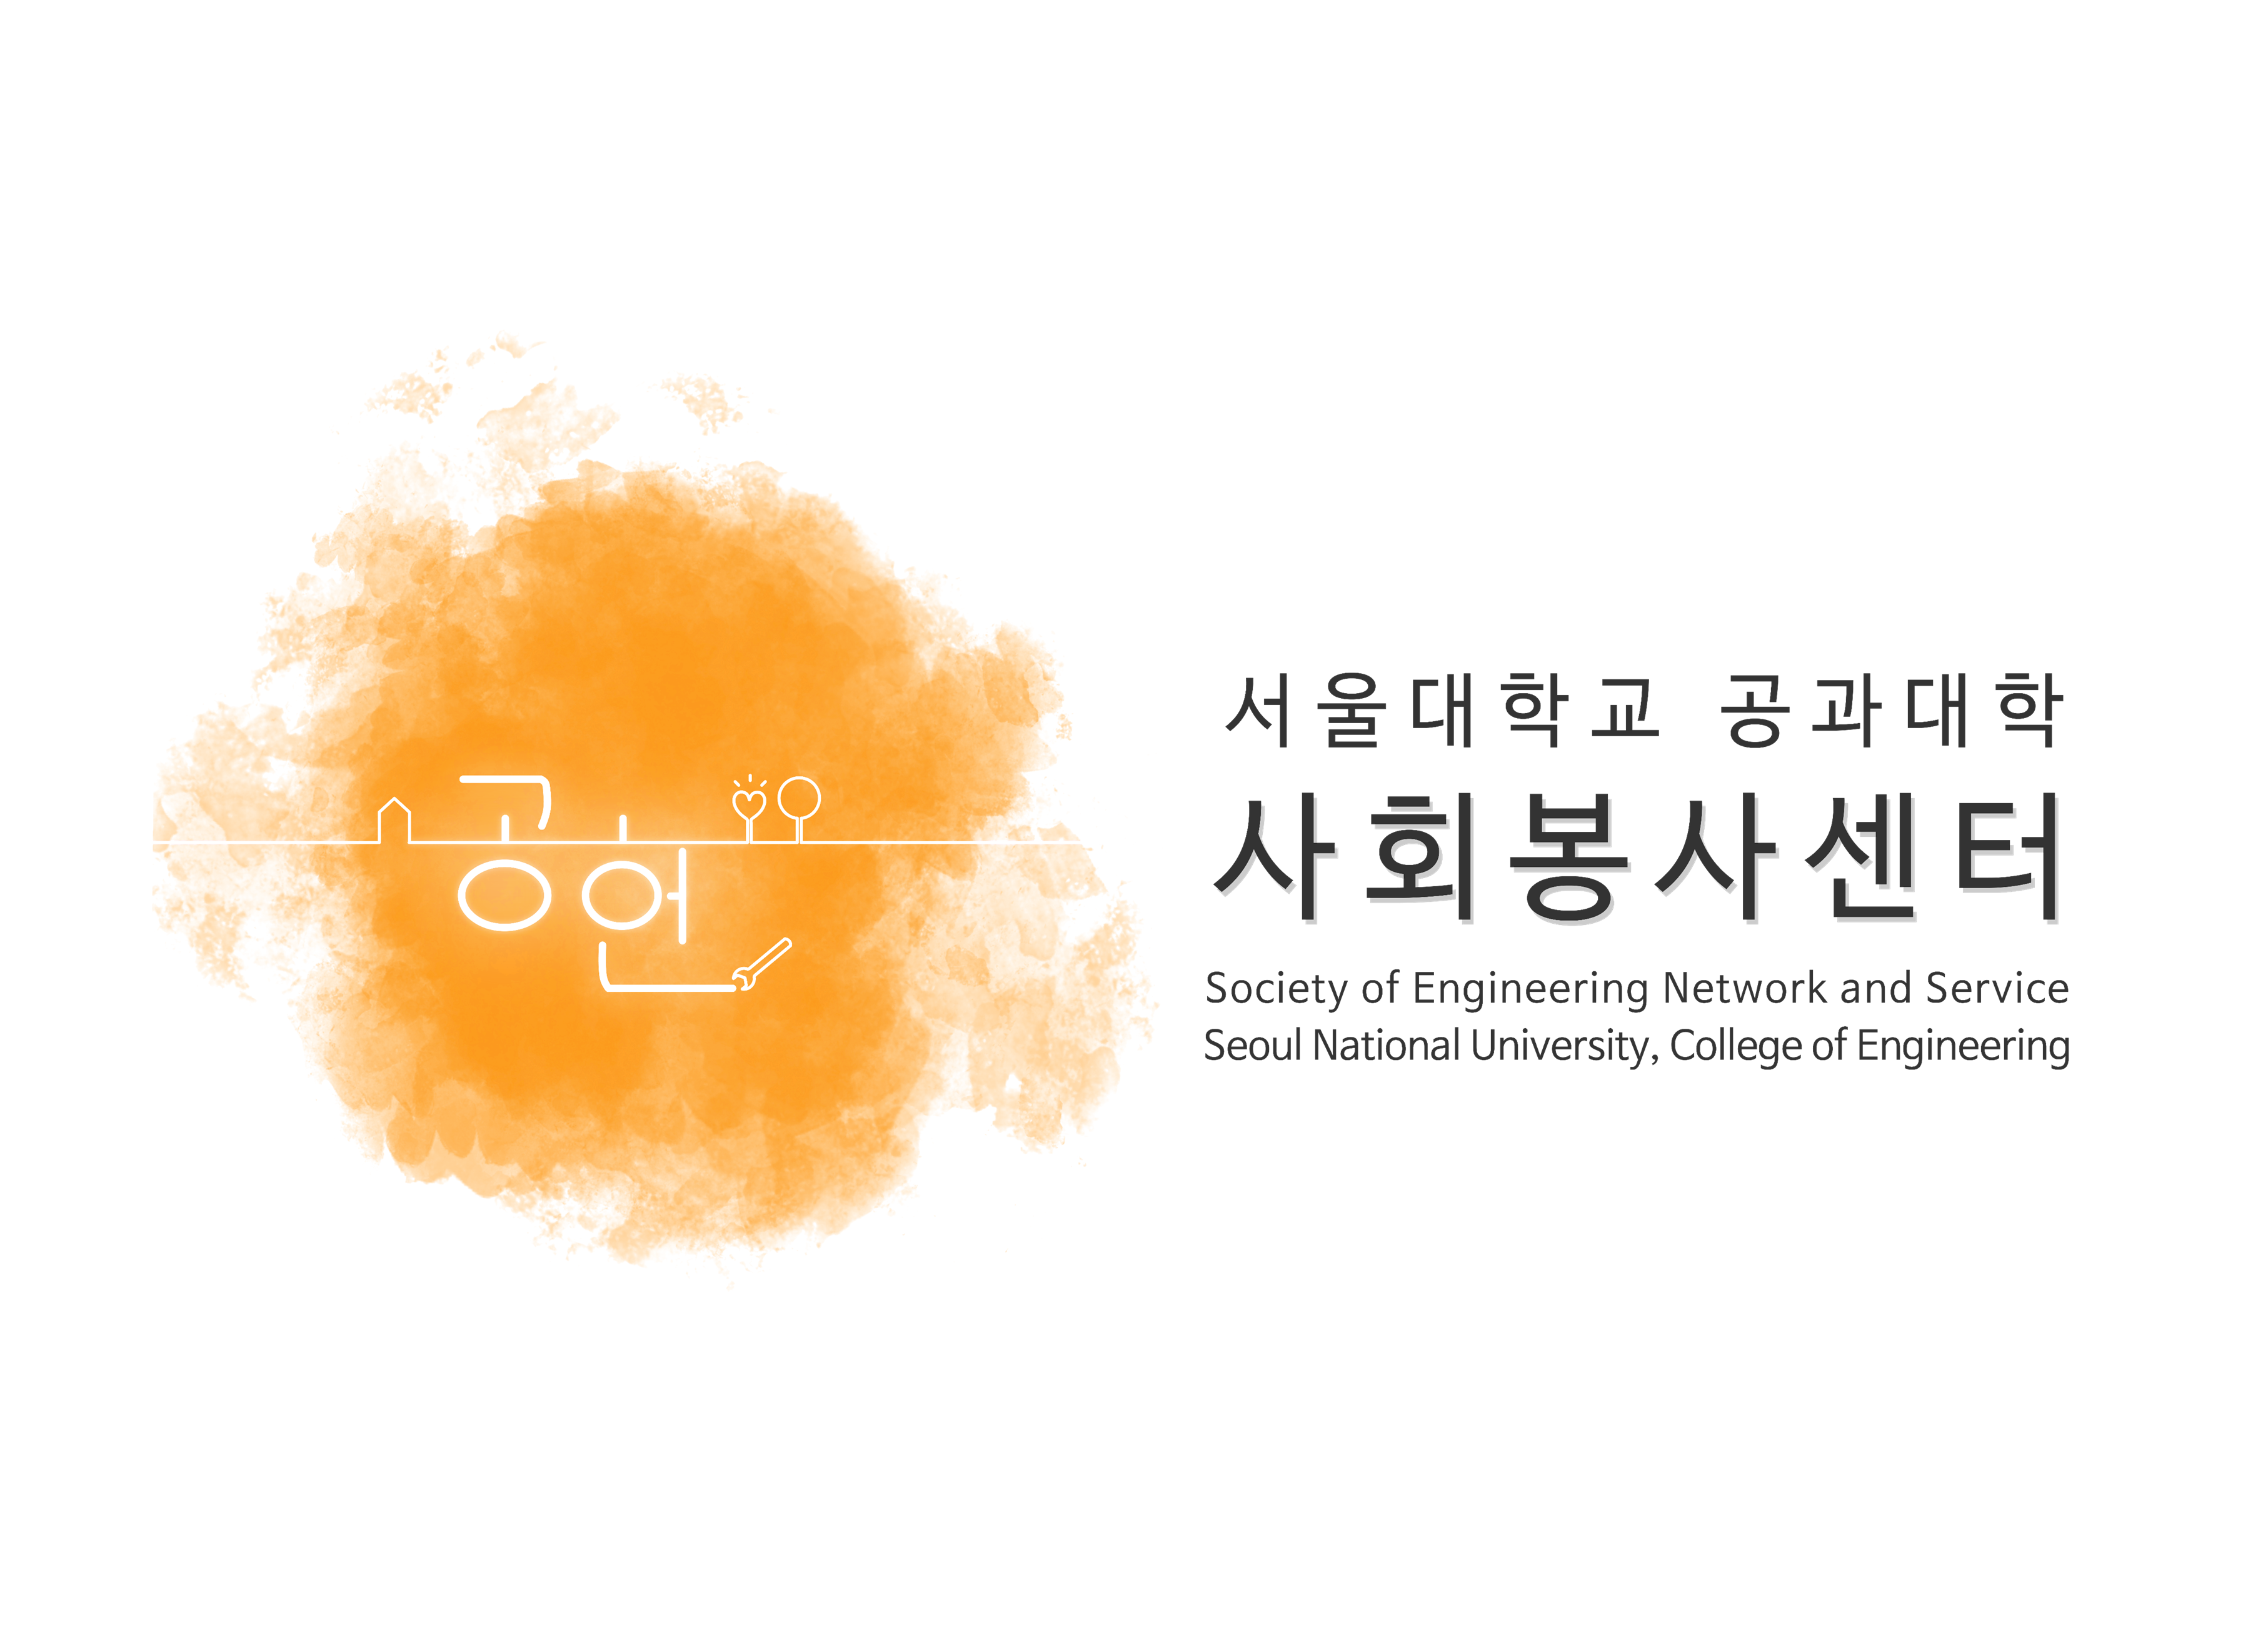 Society of Engineering Network and Service